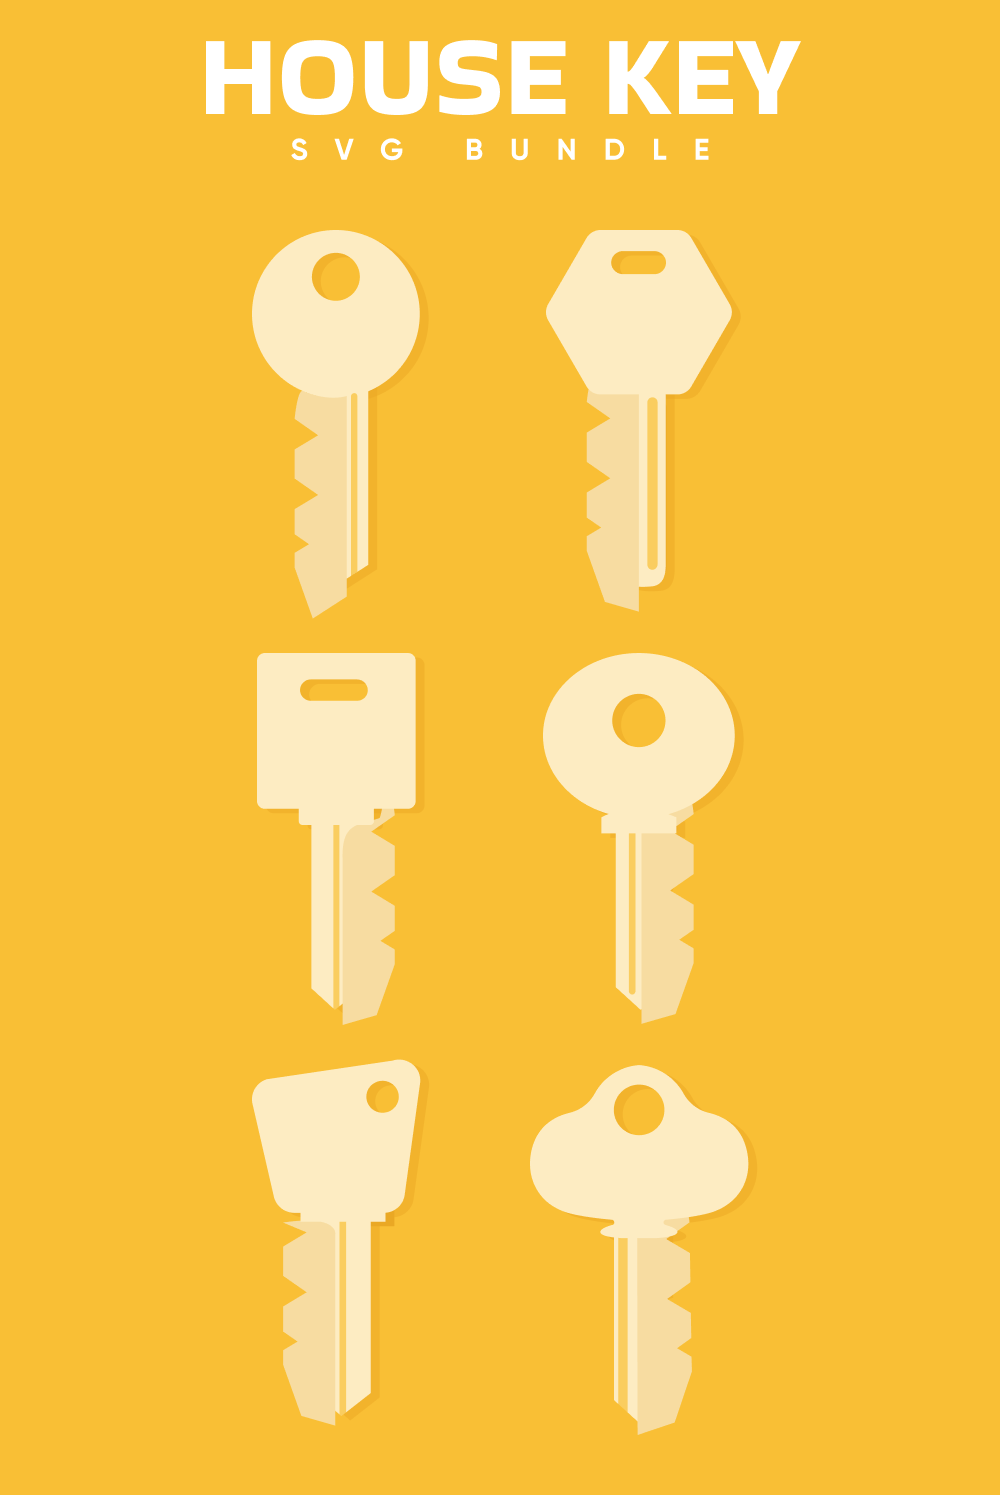 SVG package with six home keys on yellow background with title.